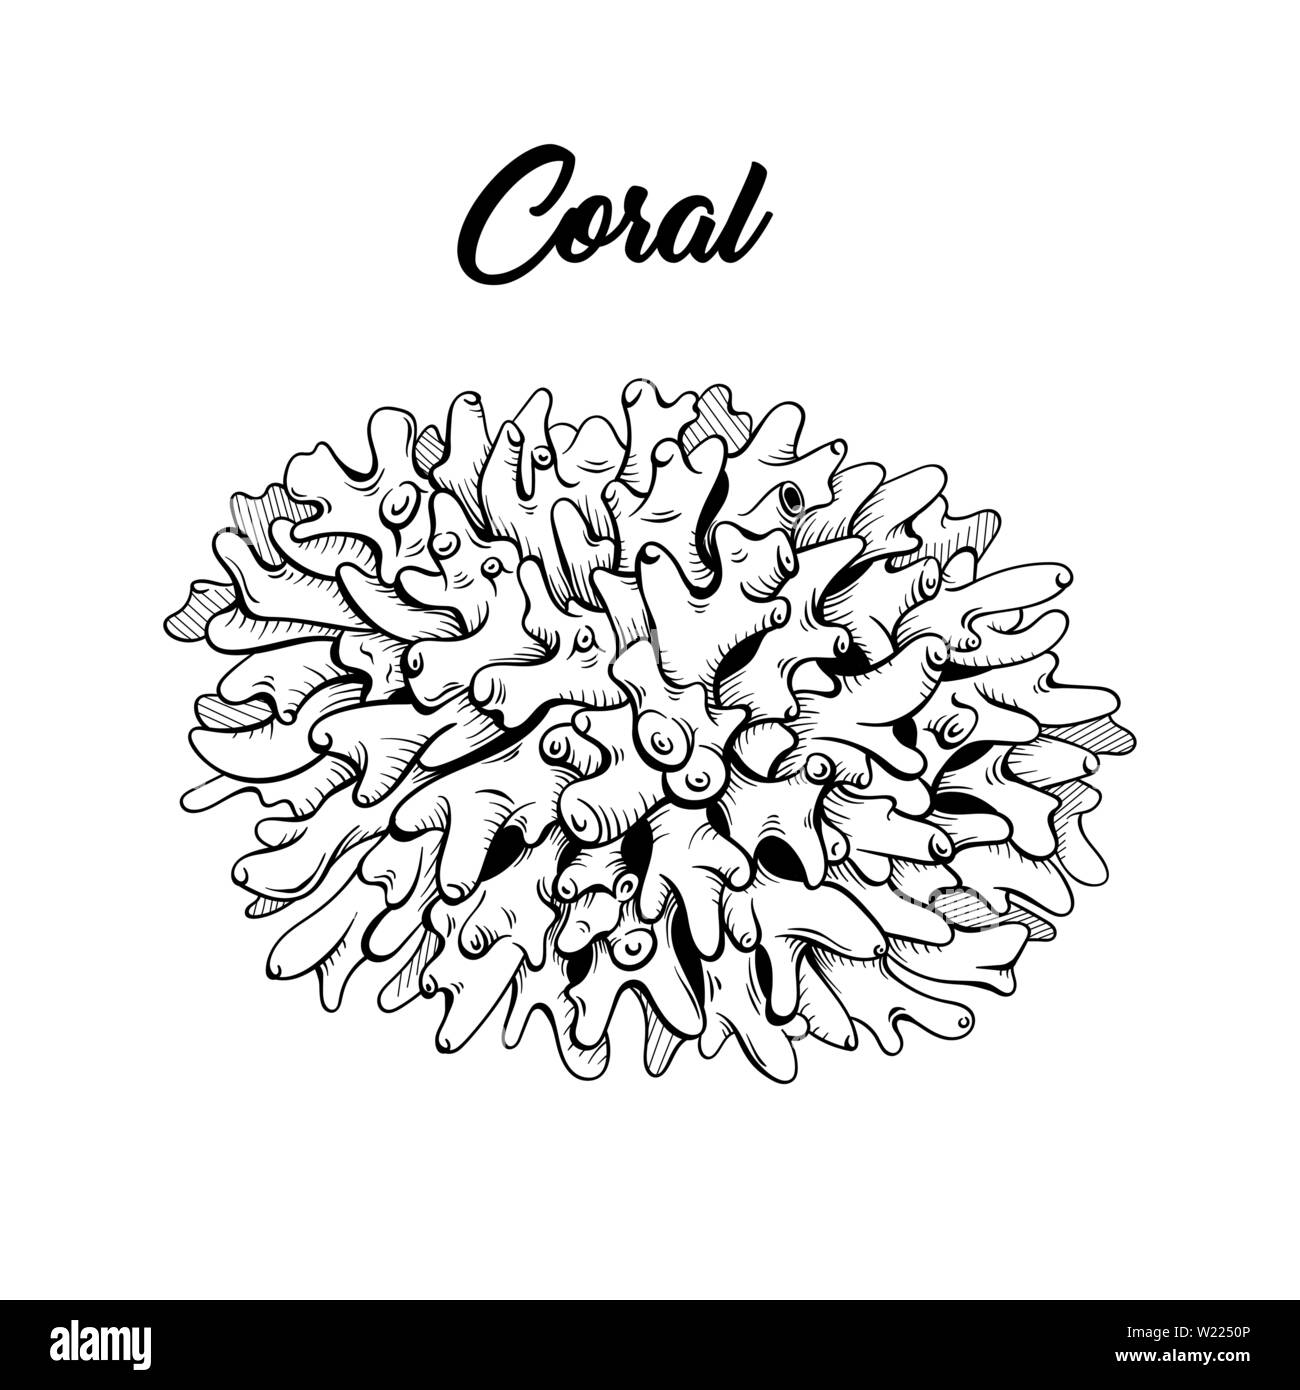 Coral black and white hand drawn illustration. Marine life, sea reef ecosystem wildlife sketch for coloring book. Aquarium decoration monochrome engraving. Scuba diving club poster design element Stock Vector